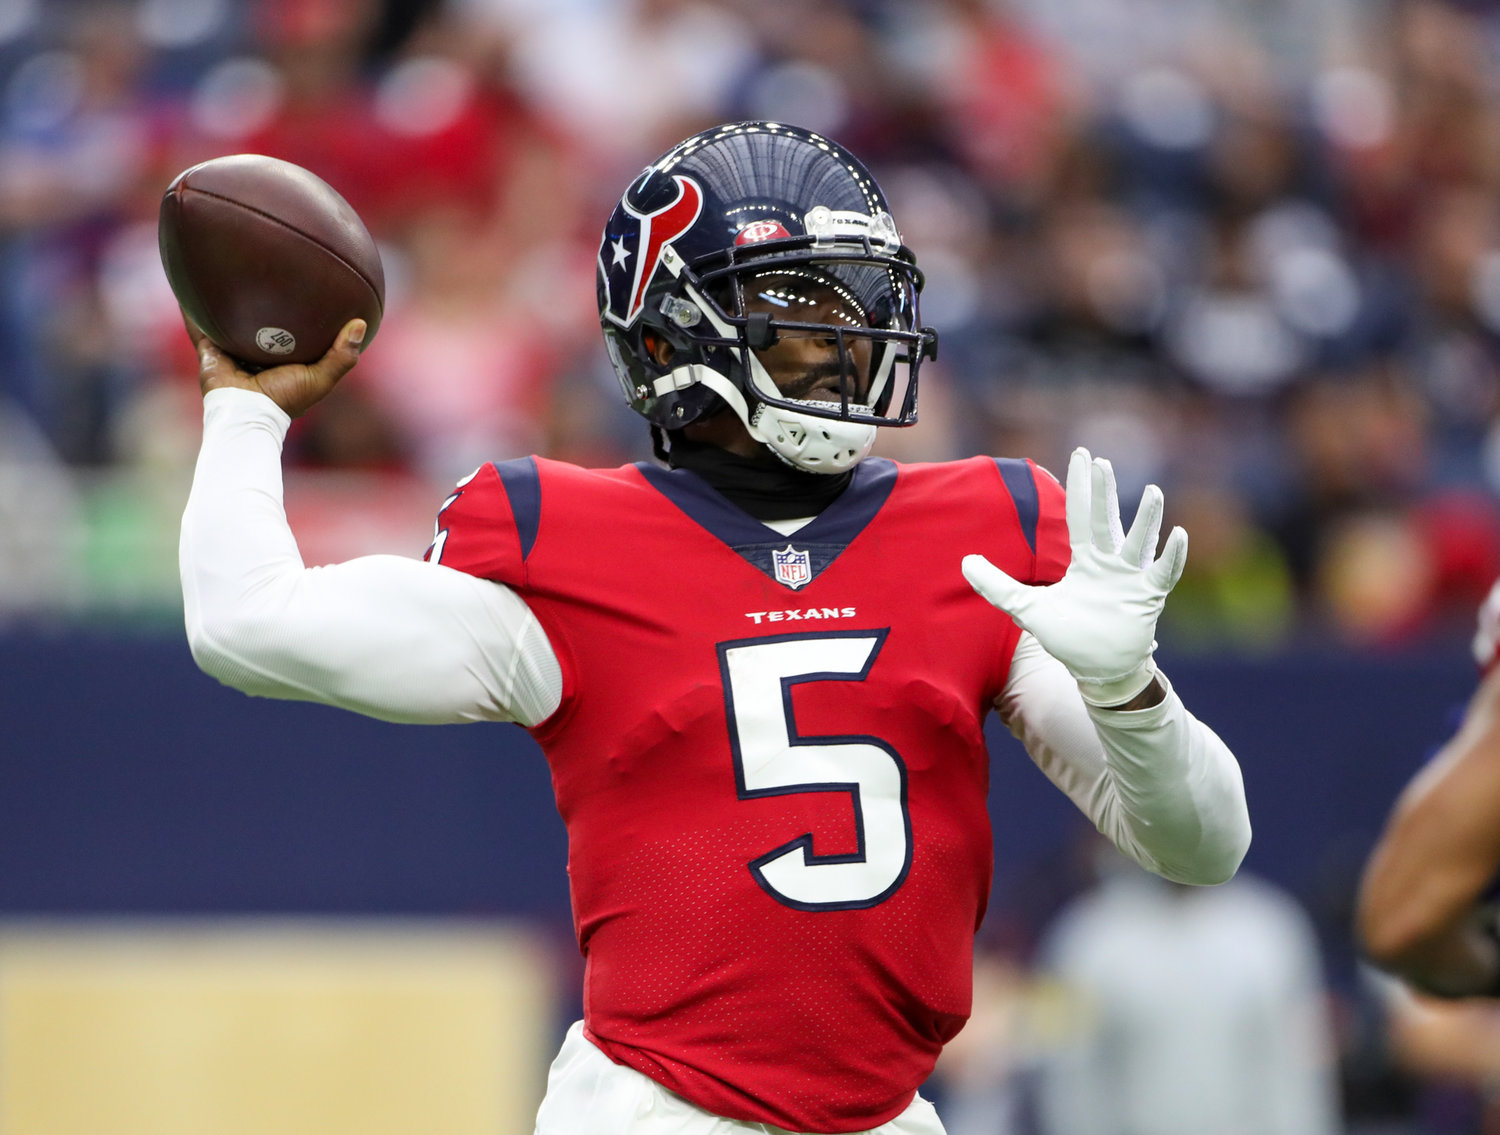 Houston Texans quarterback Tyrod Taylor (5) looks to pass during an NFL game between the Texans and the Colts on December 5, 2021 in Houston, Texas.